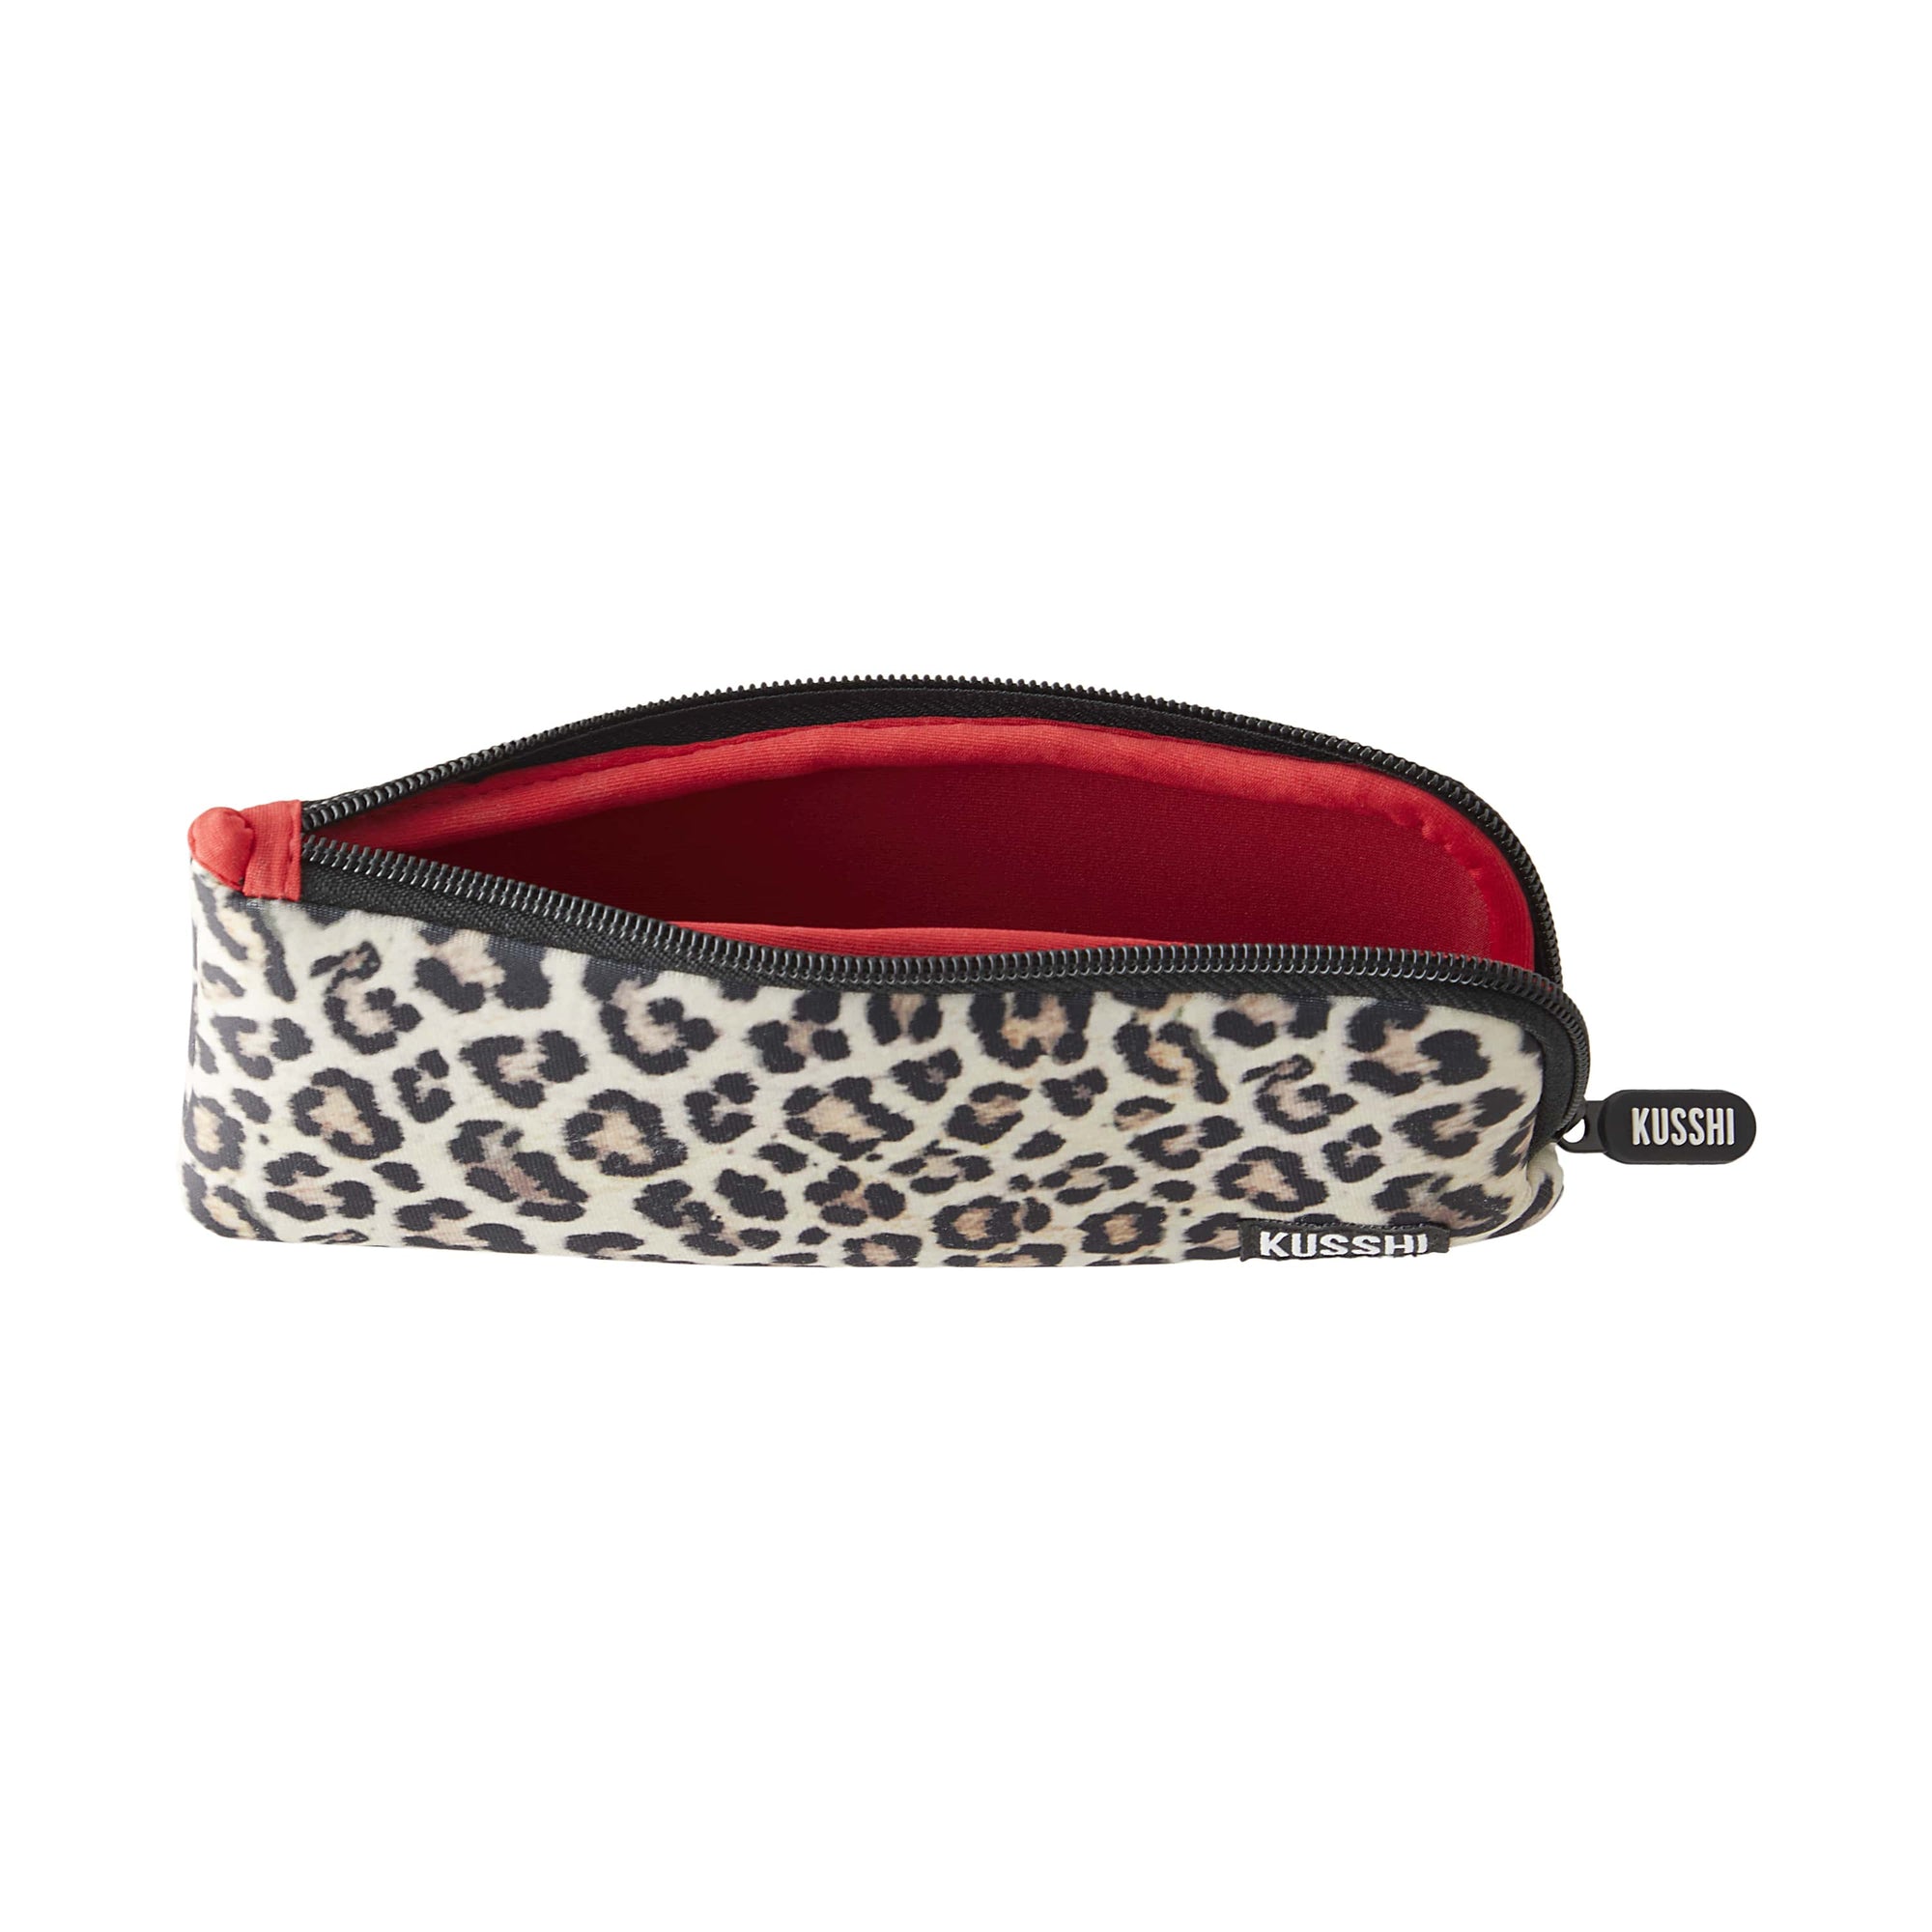 color: Leopard with Red Interior